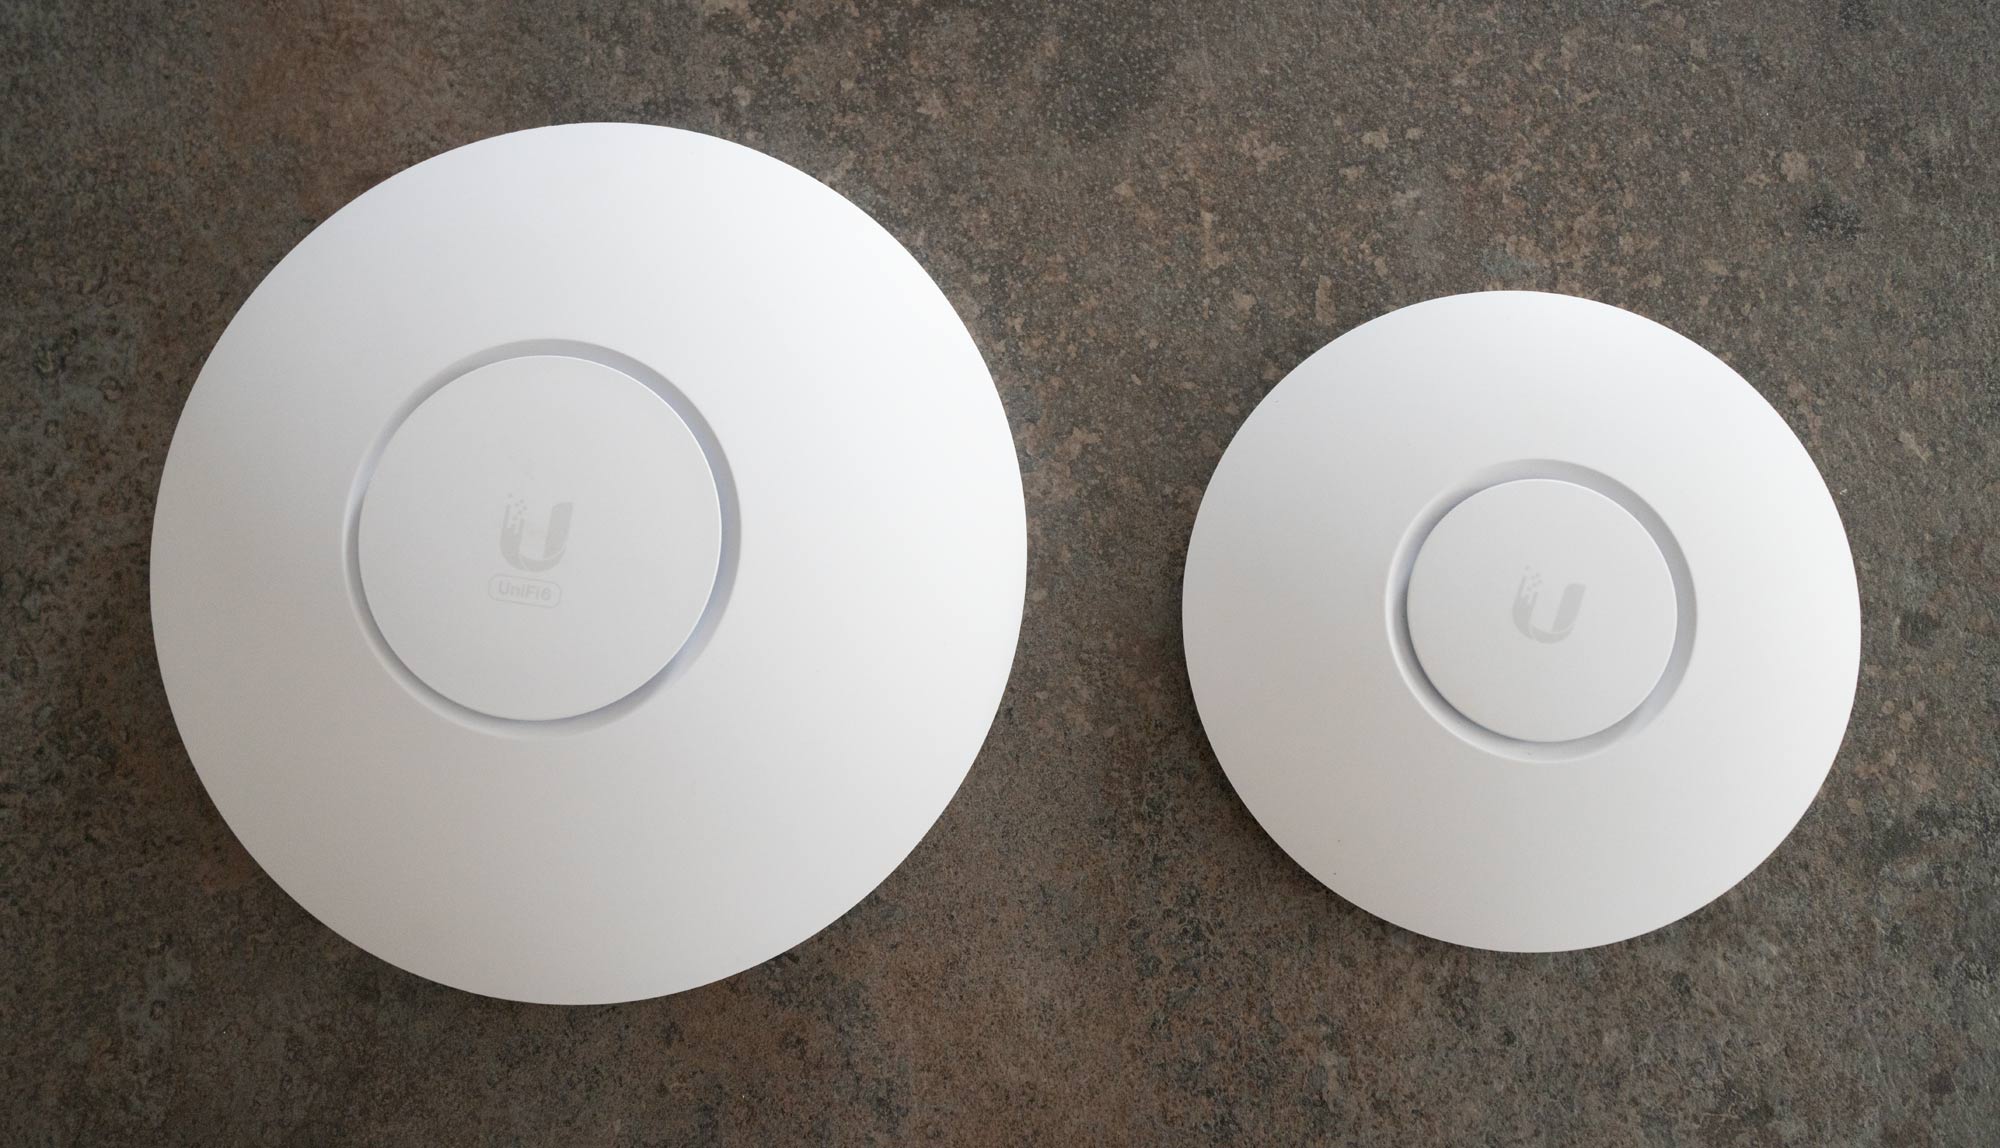 Comparison of the UniFi 6 LR with the NanoHD Access Point